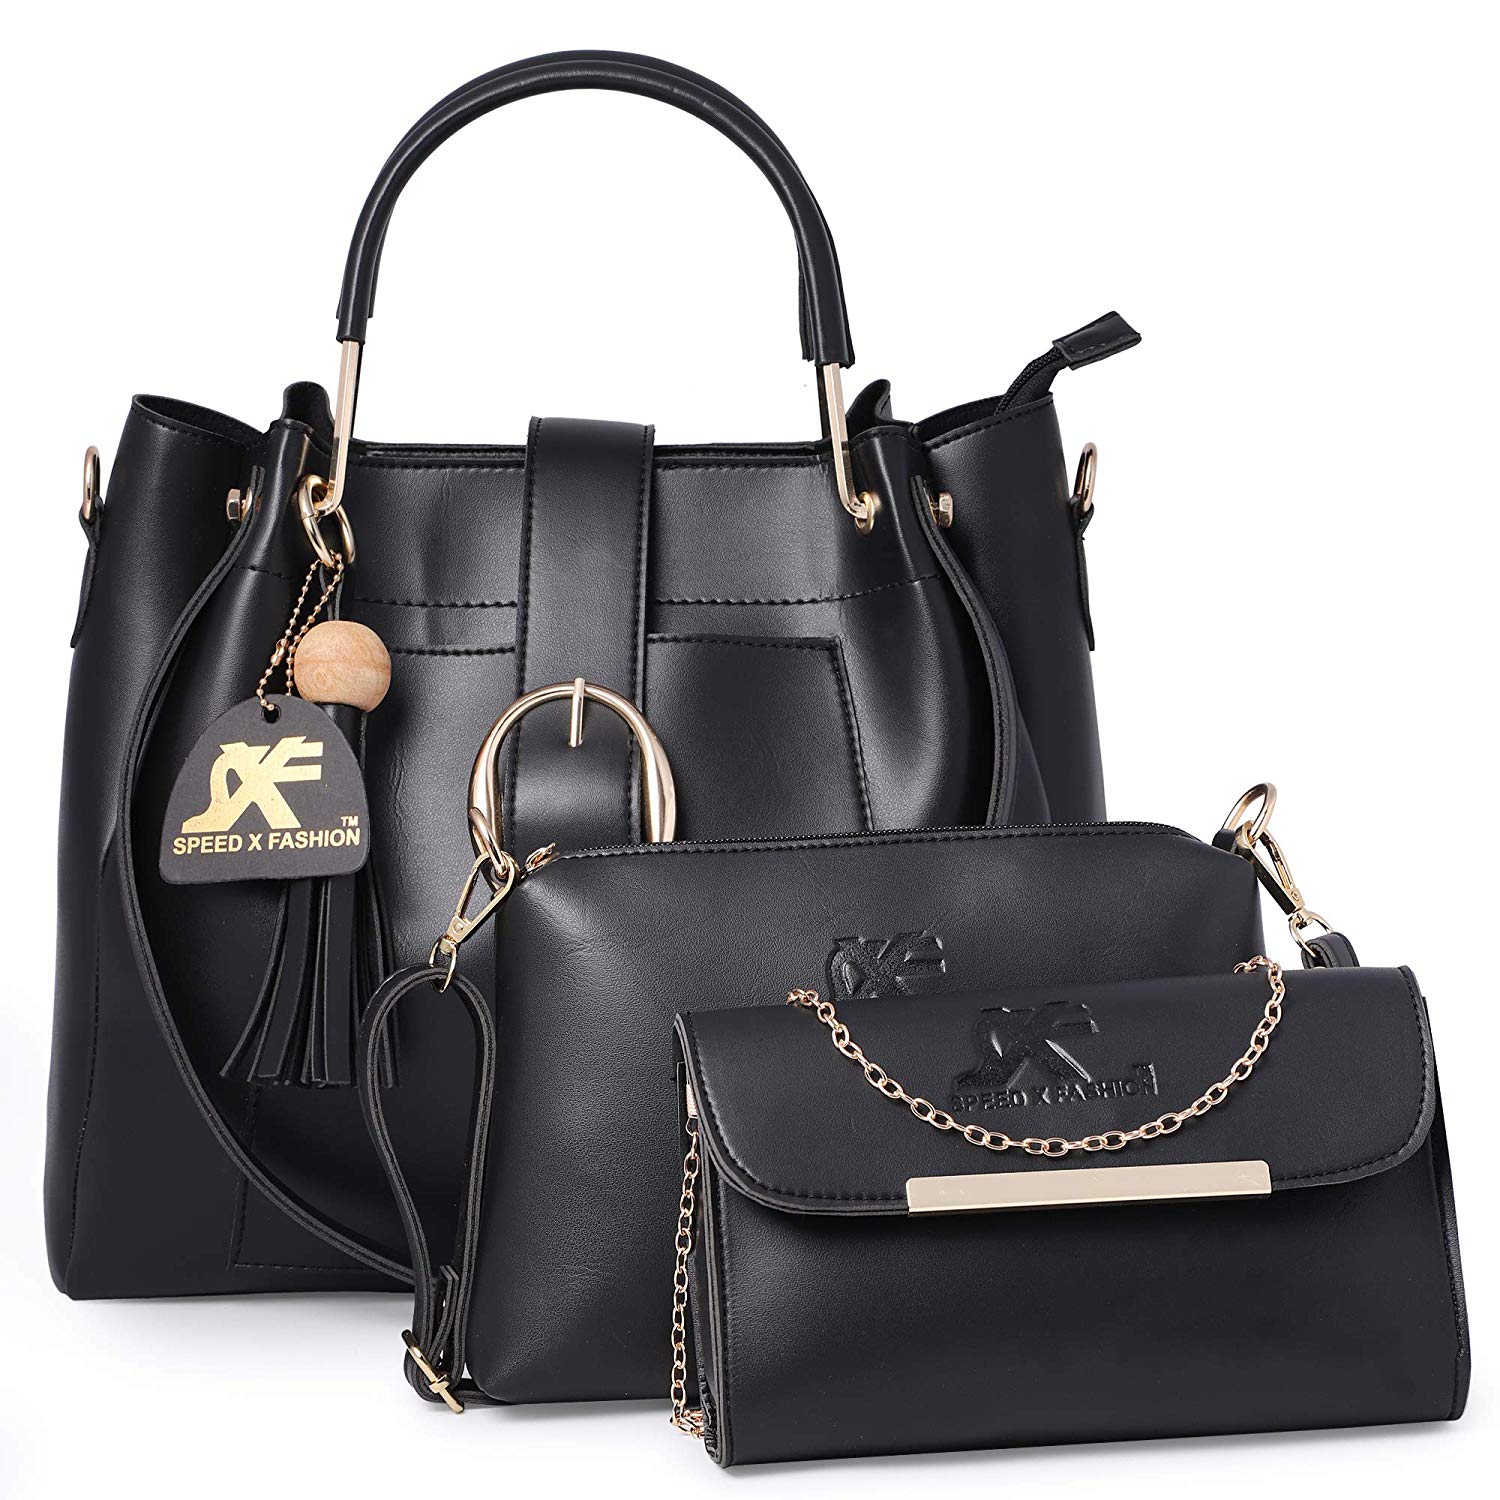 Speed X Fashion Women's Hand Bag Combo (Black) Price in India